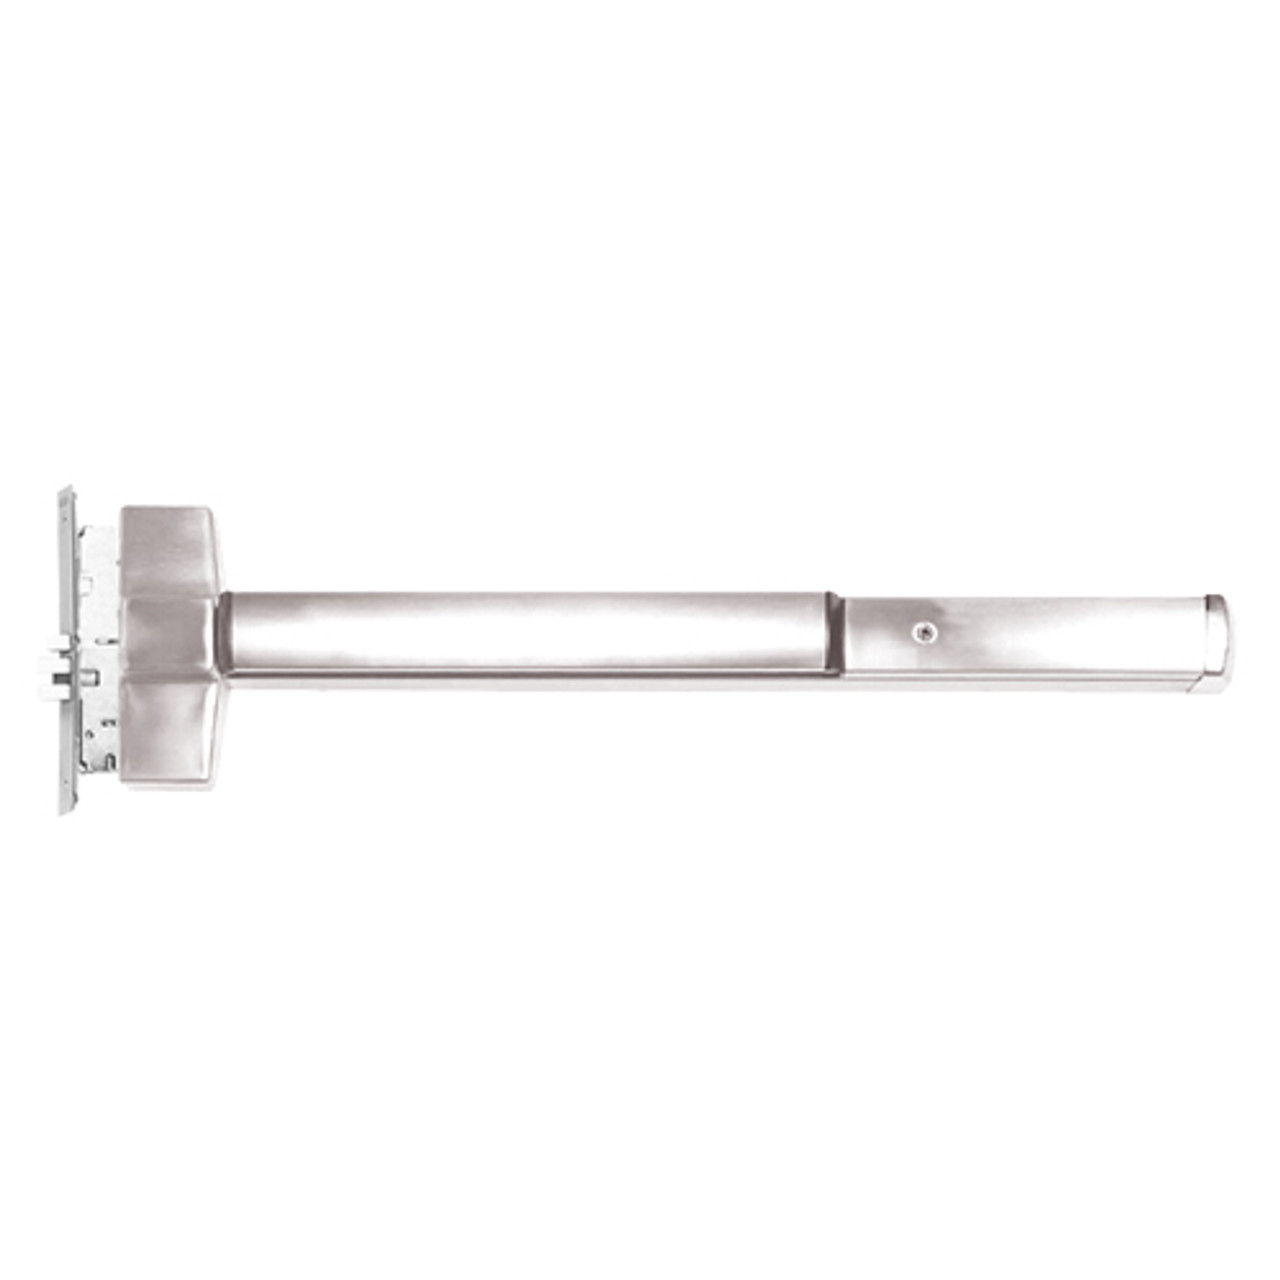 ED5600L-629-W048-RHR-SEC Corbin ED5600 Series Non Fire Rated Mortise Exit Device in Bright Stainless Steel Finish